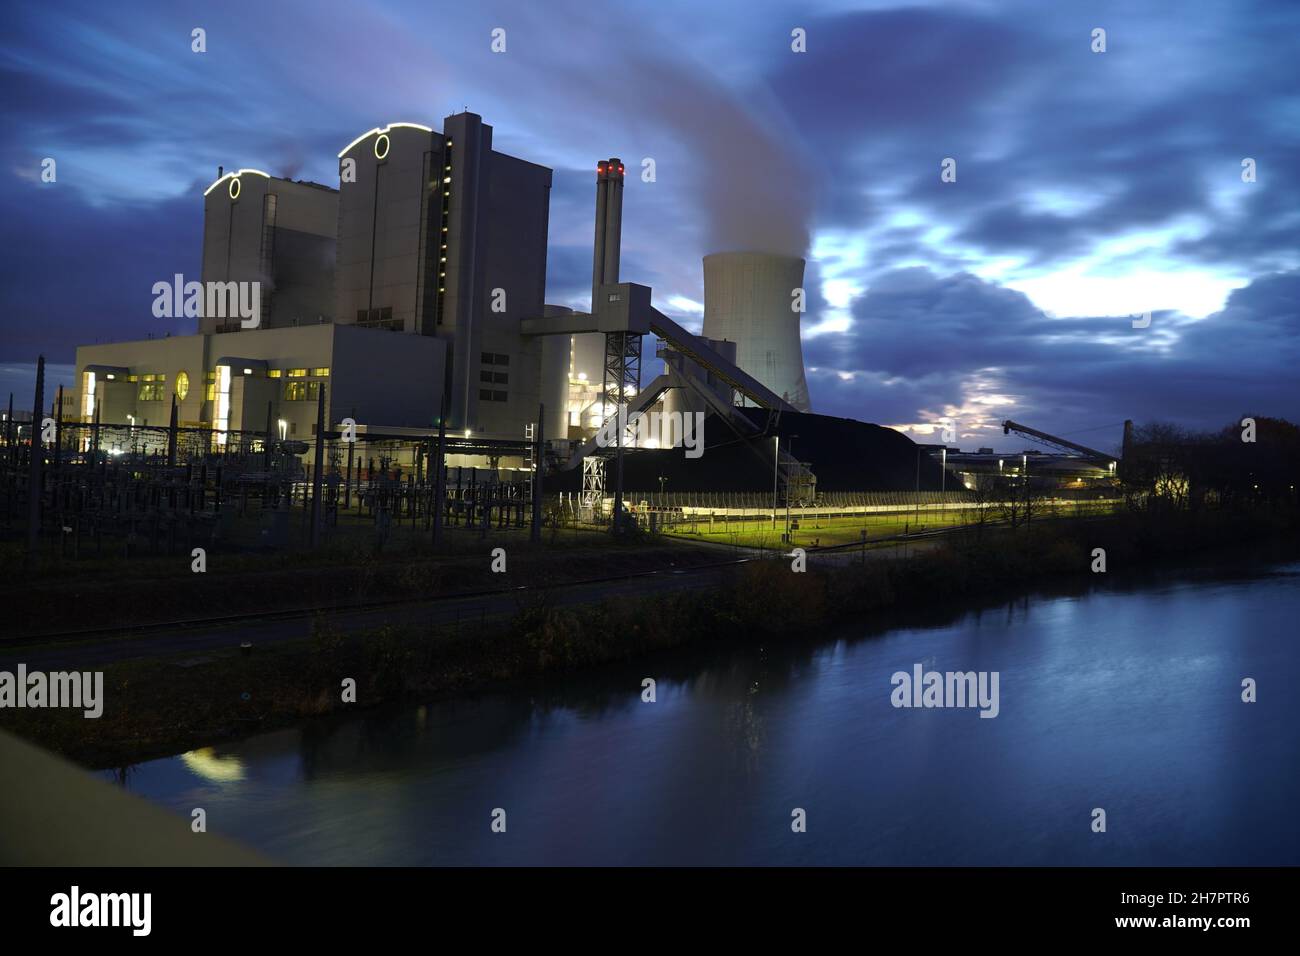 Coal-fired power plant with stone coal stockpile by night. Old technology that is one of the factors causing global warming. Hanover, Germany Stock Photo